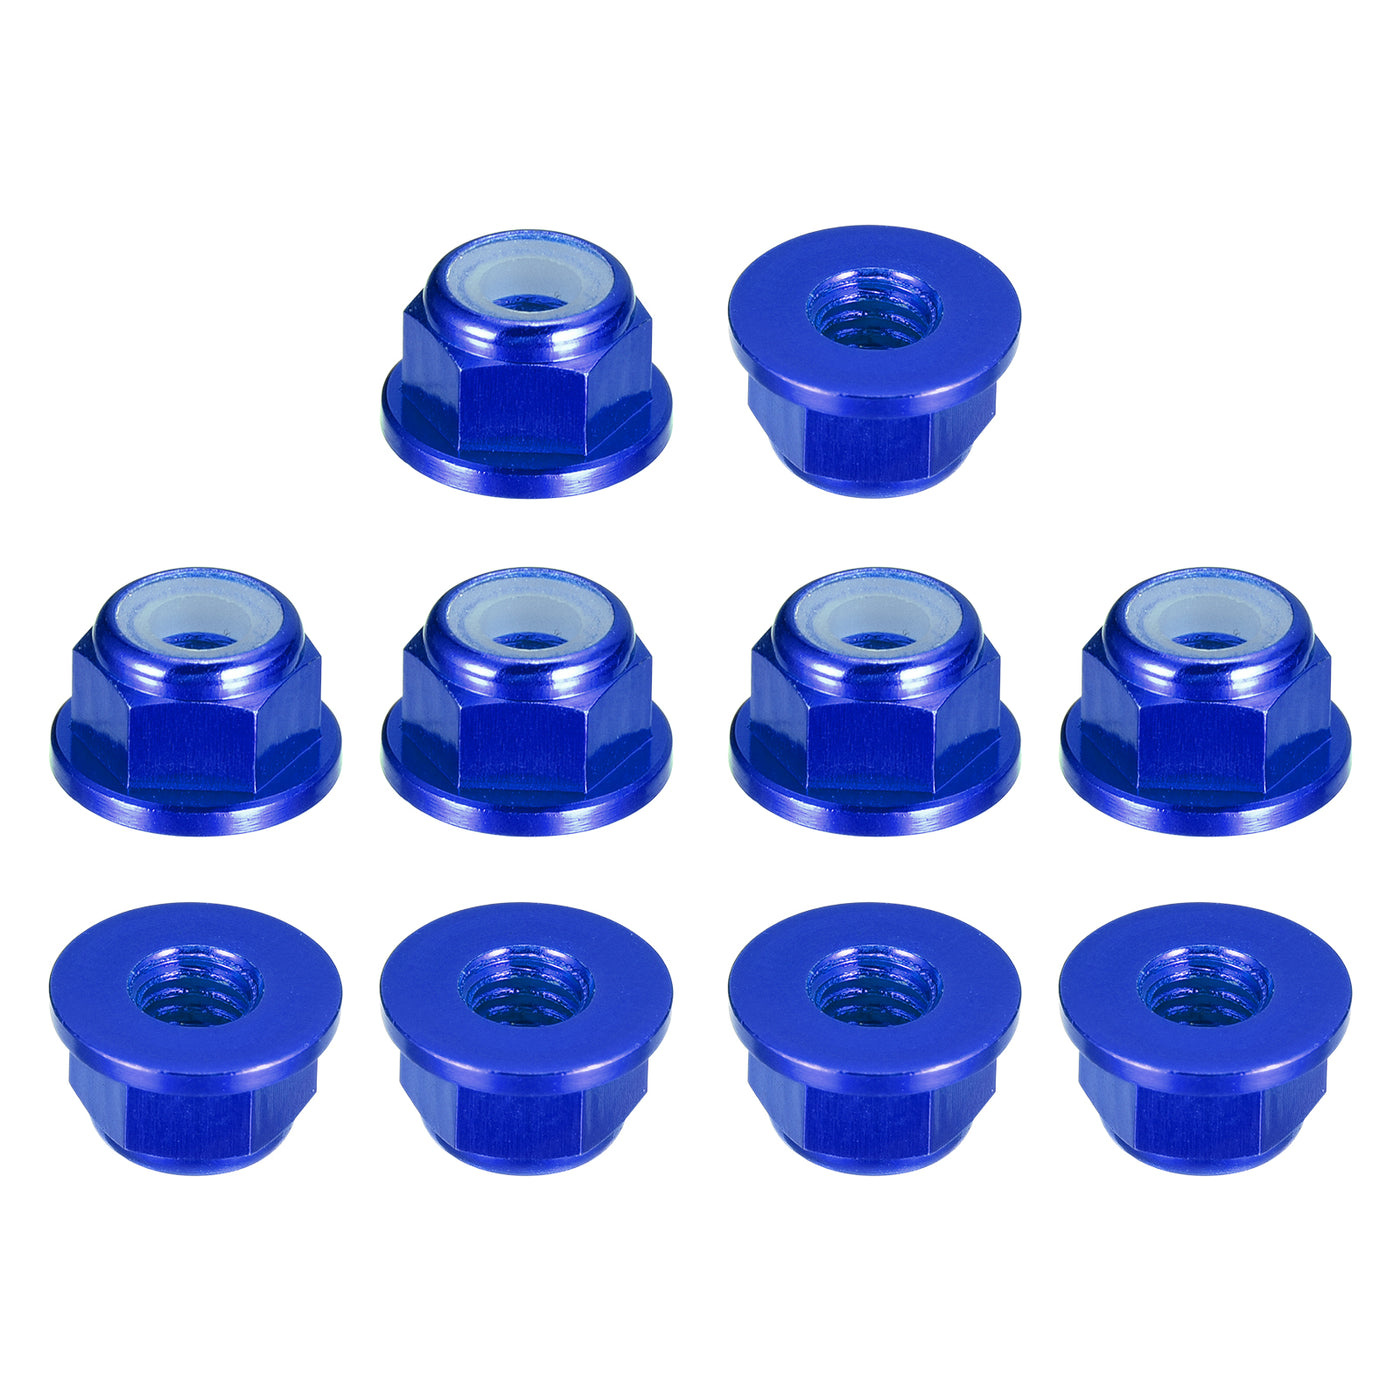 uxcell Uxcell Nylon Insert Hex Lock Nuts, 10pcs - M5 x 0.8mm Aluminum Alloy Self-Locking Nut, Anodizing Flange Lock Nut for Fasteners (Sapphire Blue)